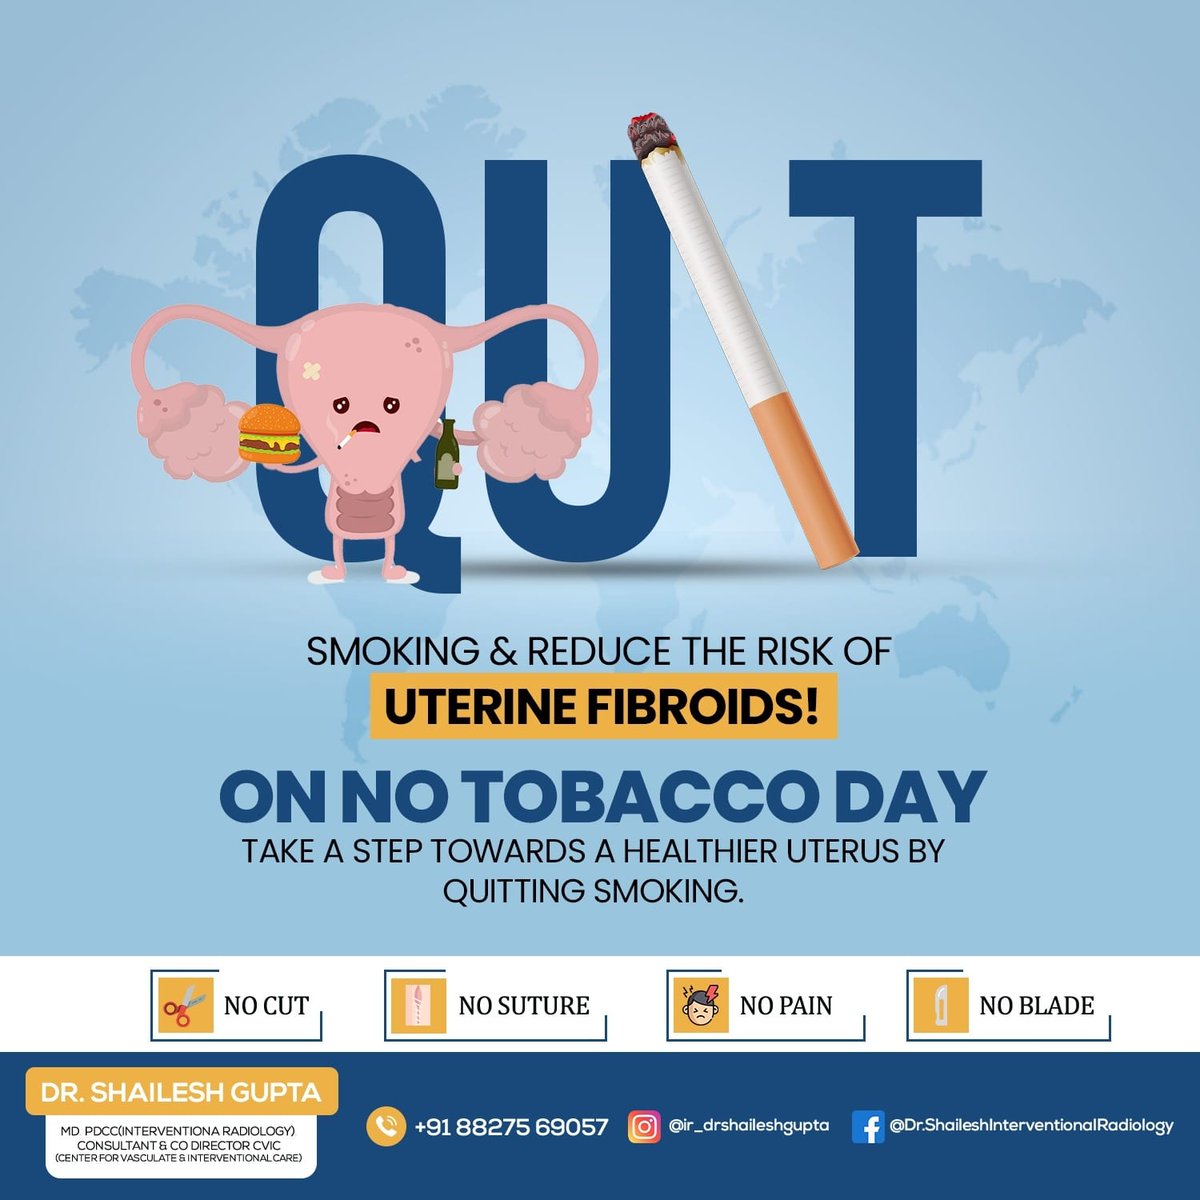 Tobacco is made to kill you, stay away from it.

#drshaileshgupta #interventionalradiology #choithrhospital #indore #ujjain #bhopal #vapeworld #worldnotobaccoday #vapefamily #vapestore #tobaccofree #tobacco #healthylifestyle #nonsmoker #healthylife #quitnow #smokefreelife